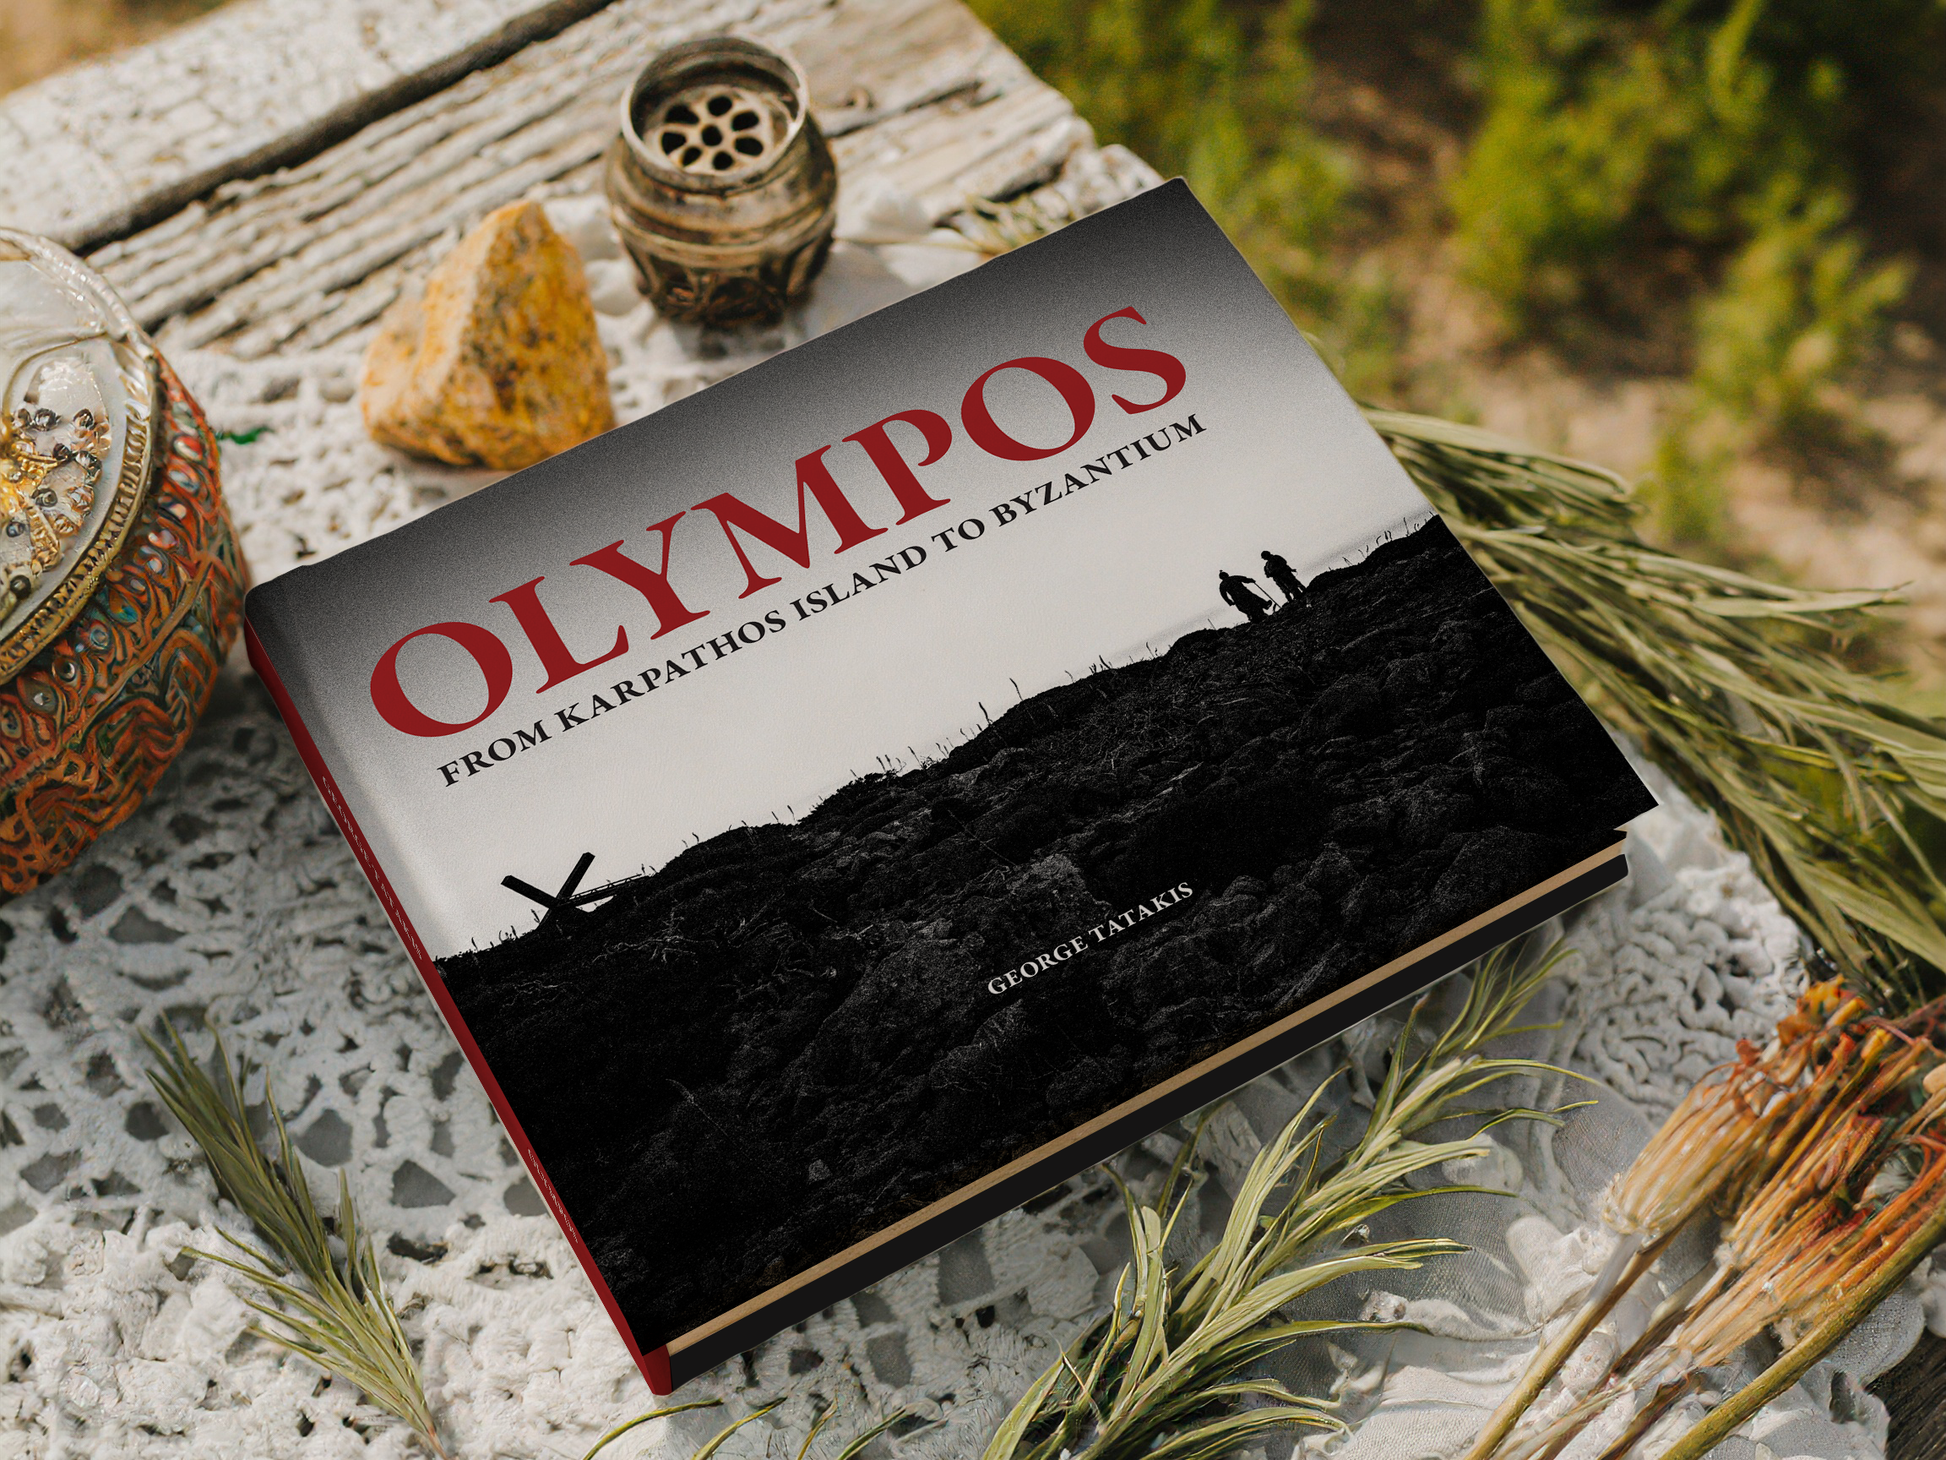 Black and White Coffee Table Photo Book By George Tatakis | Greece | Olympos - From Karpathos island to Byzantium | Worldwide Shipping